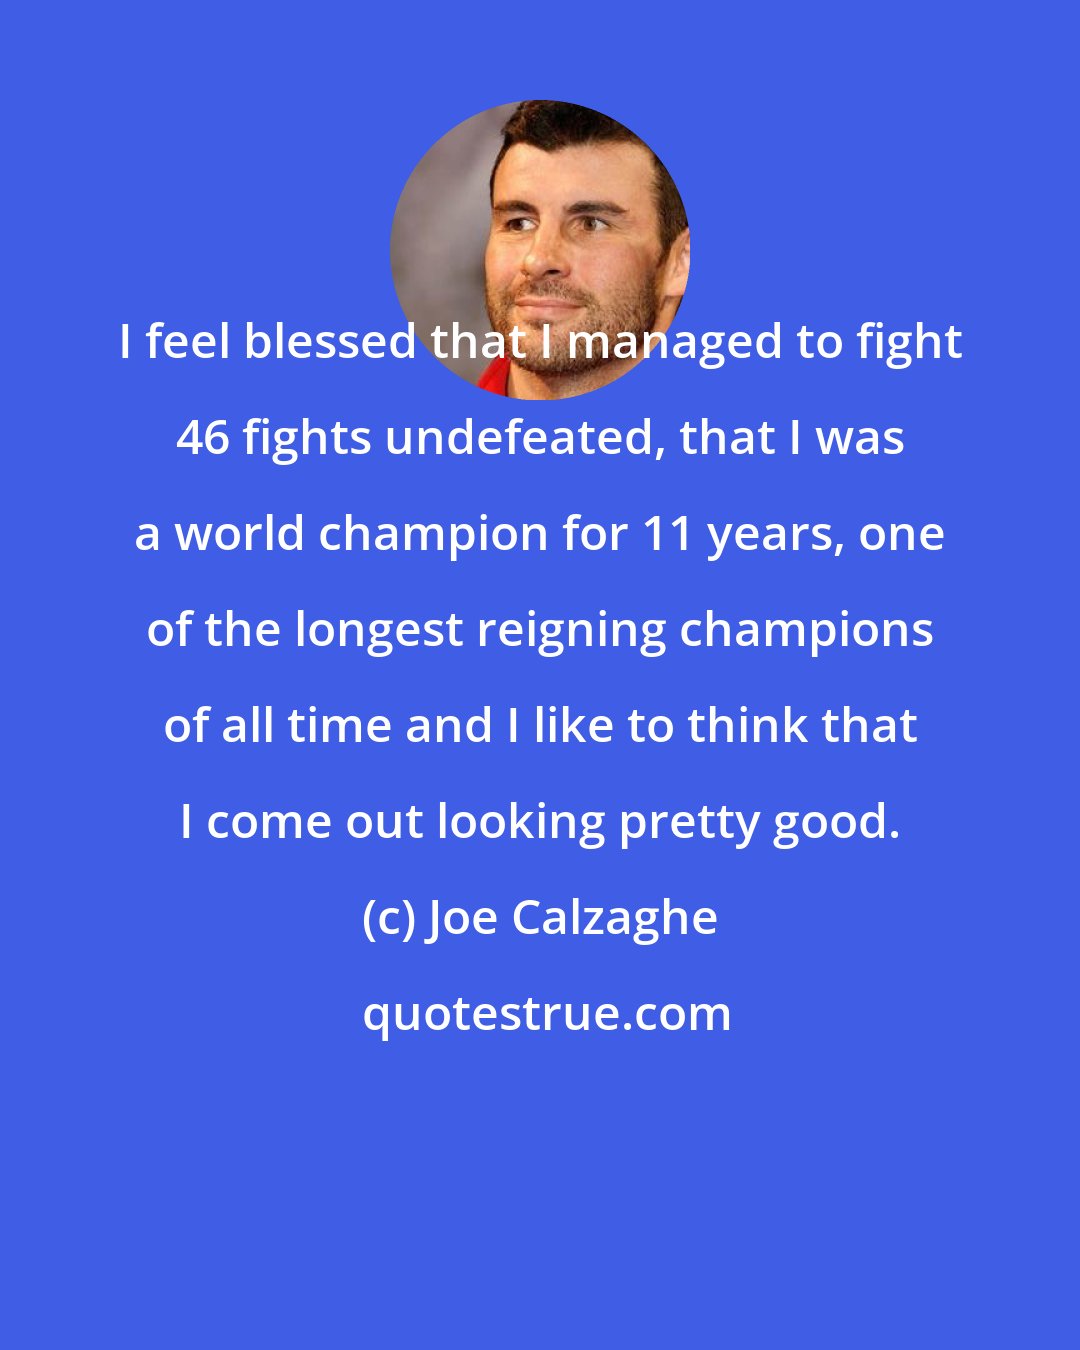 Joe Calzaghe: I feel blessed that I managed to fight 46 fights undefeated, that I was a world champion for 11 years, one of the longest reigning champions of all time and I like to think that I come out looking pretty good.